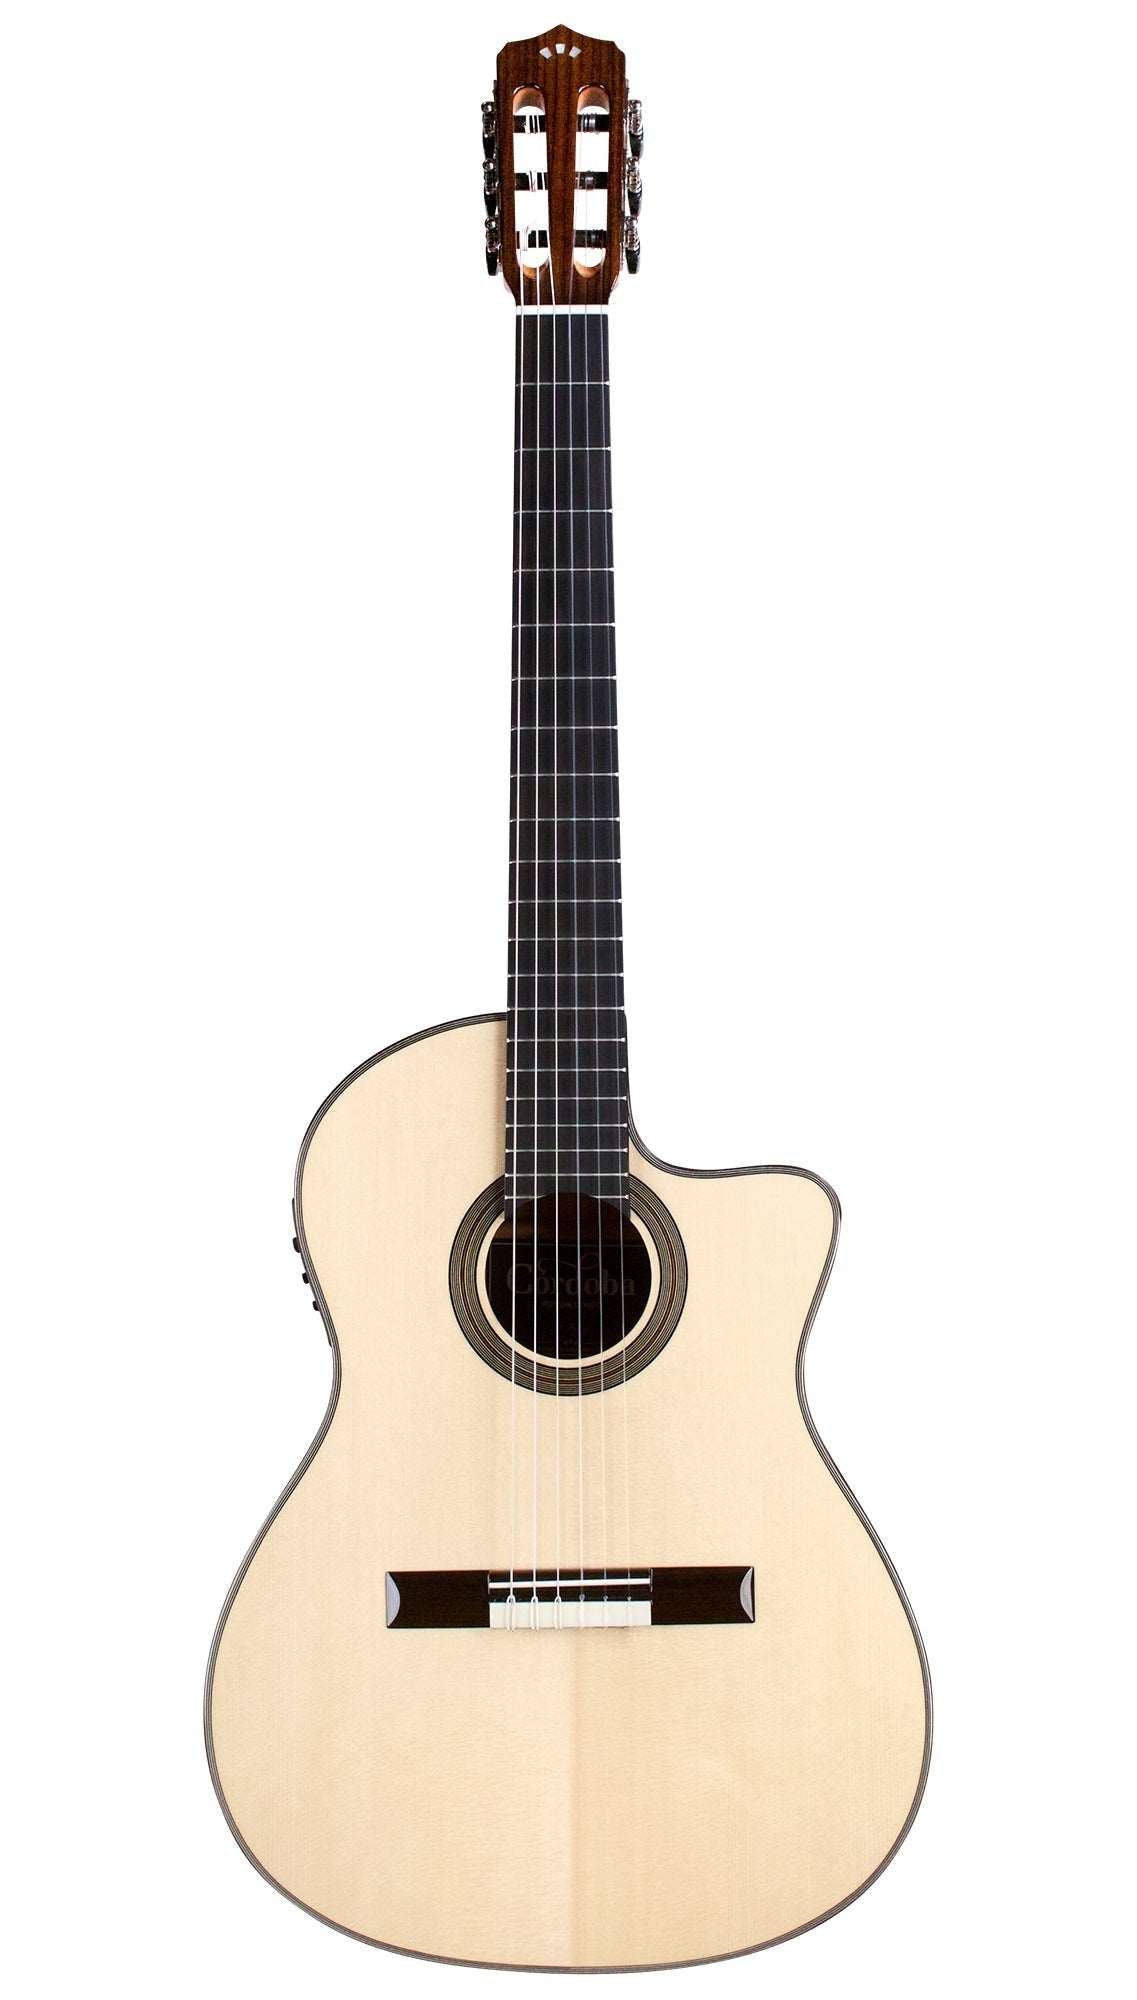 Cordoba Fusion 14 Maple Classical Guitar - Solid European Spruce Top, Flamed Maple Back & Sides, With Gator Guitar Case